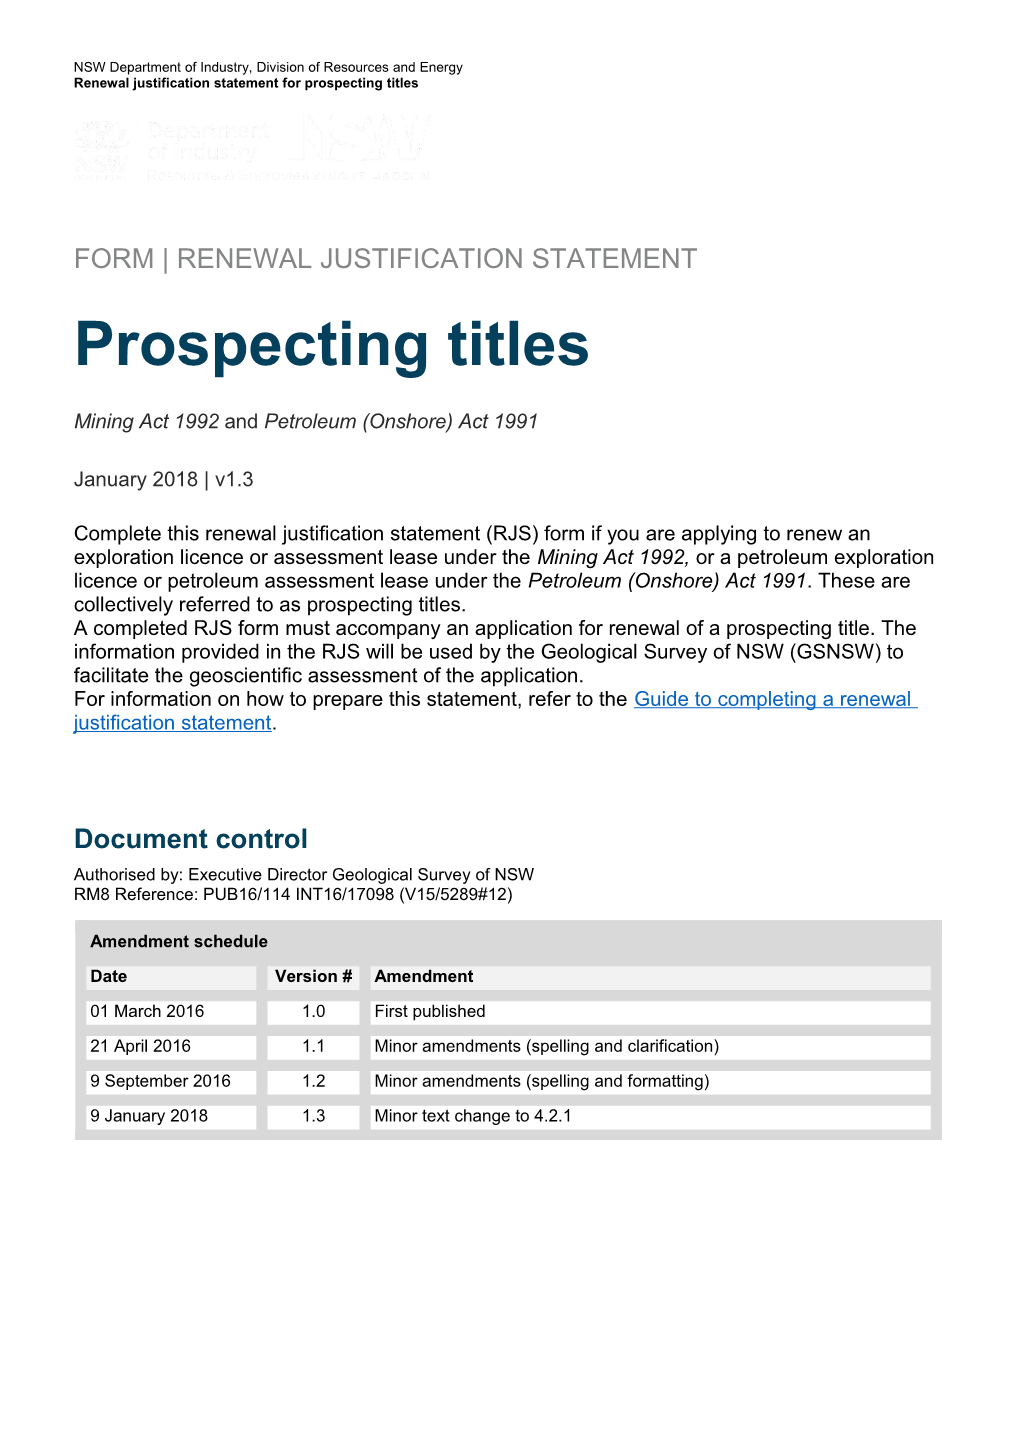 Renewal Justification Statement for Prospecting Titles